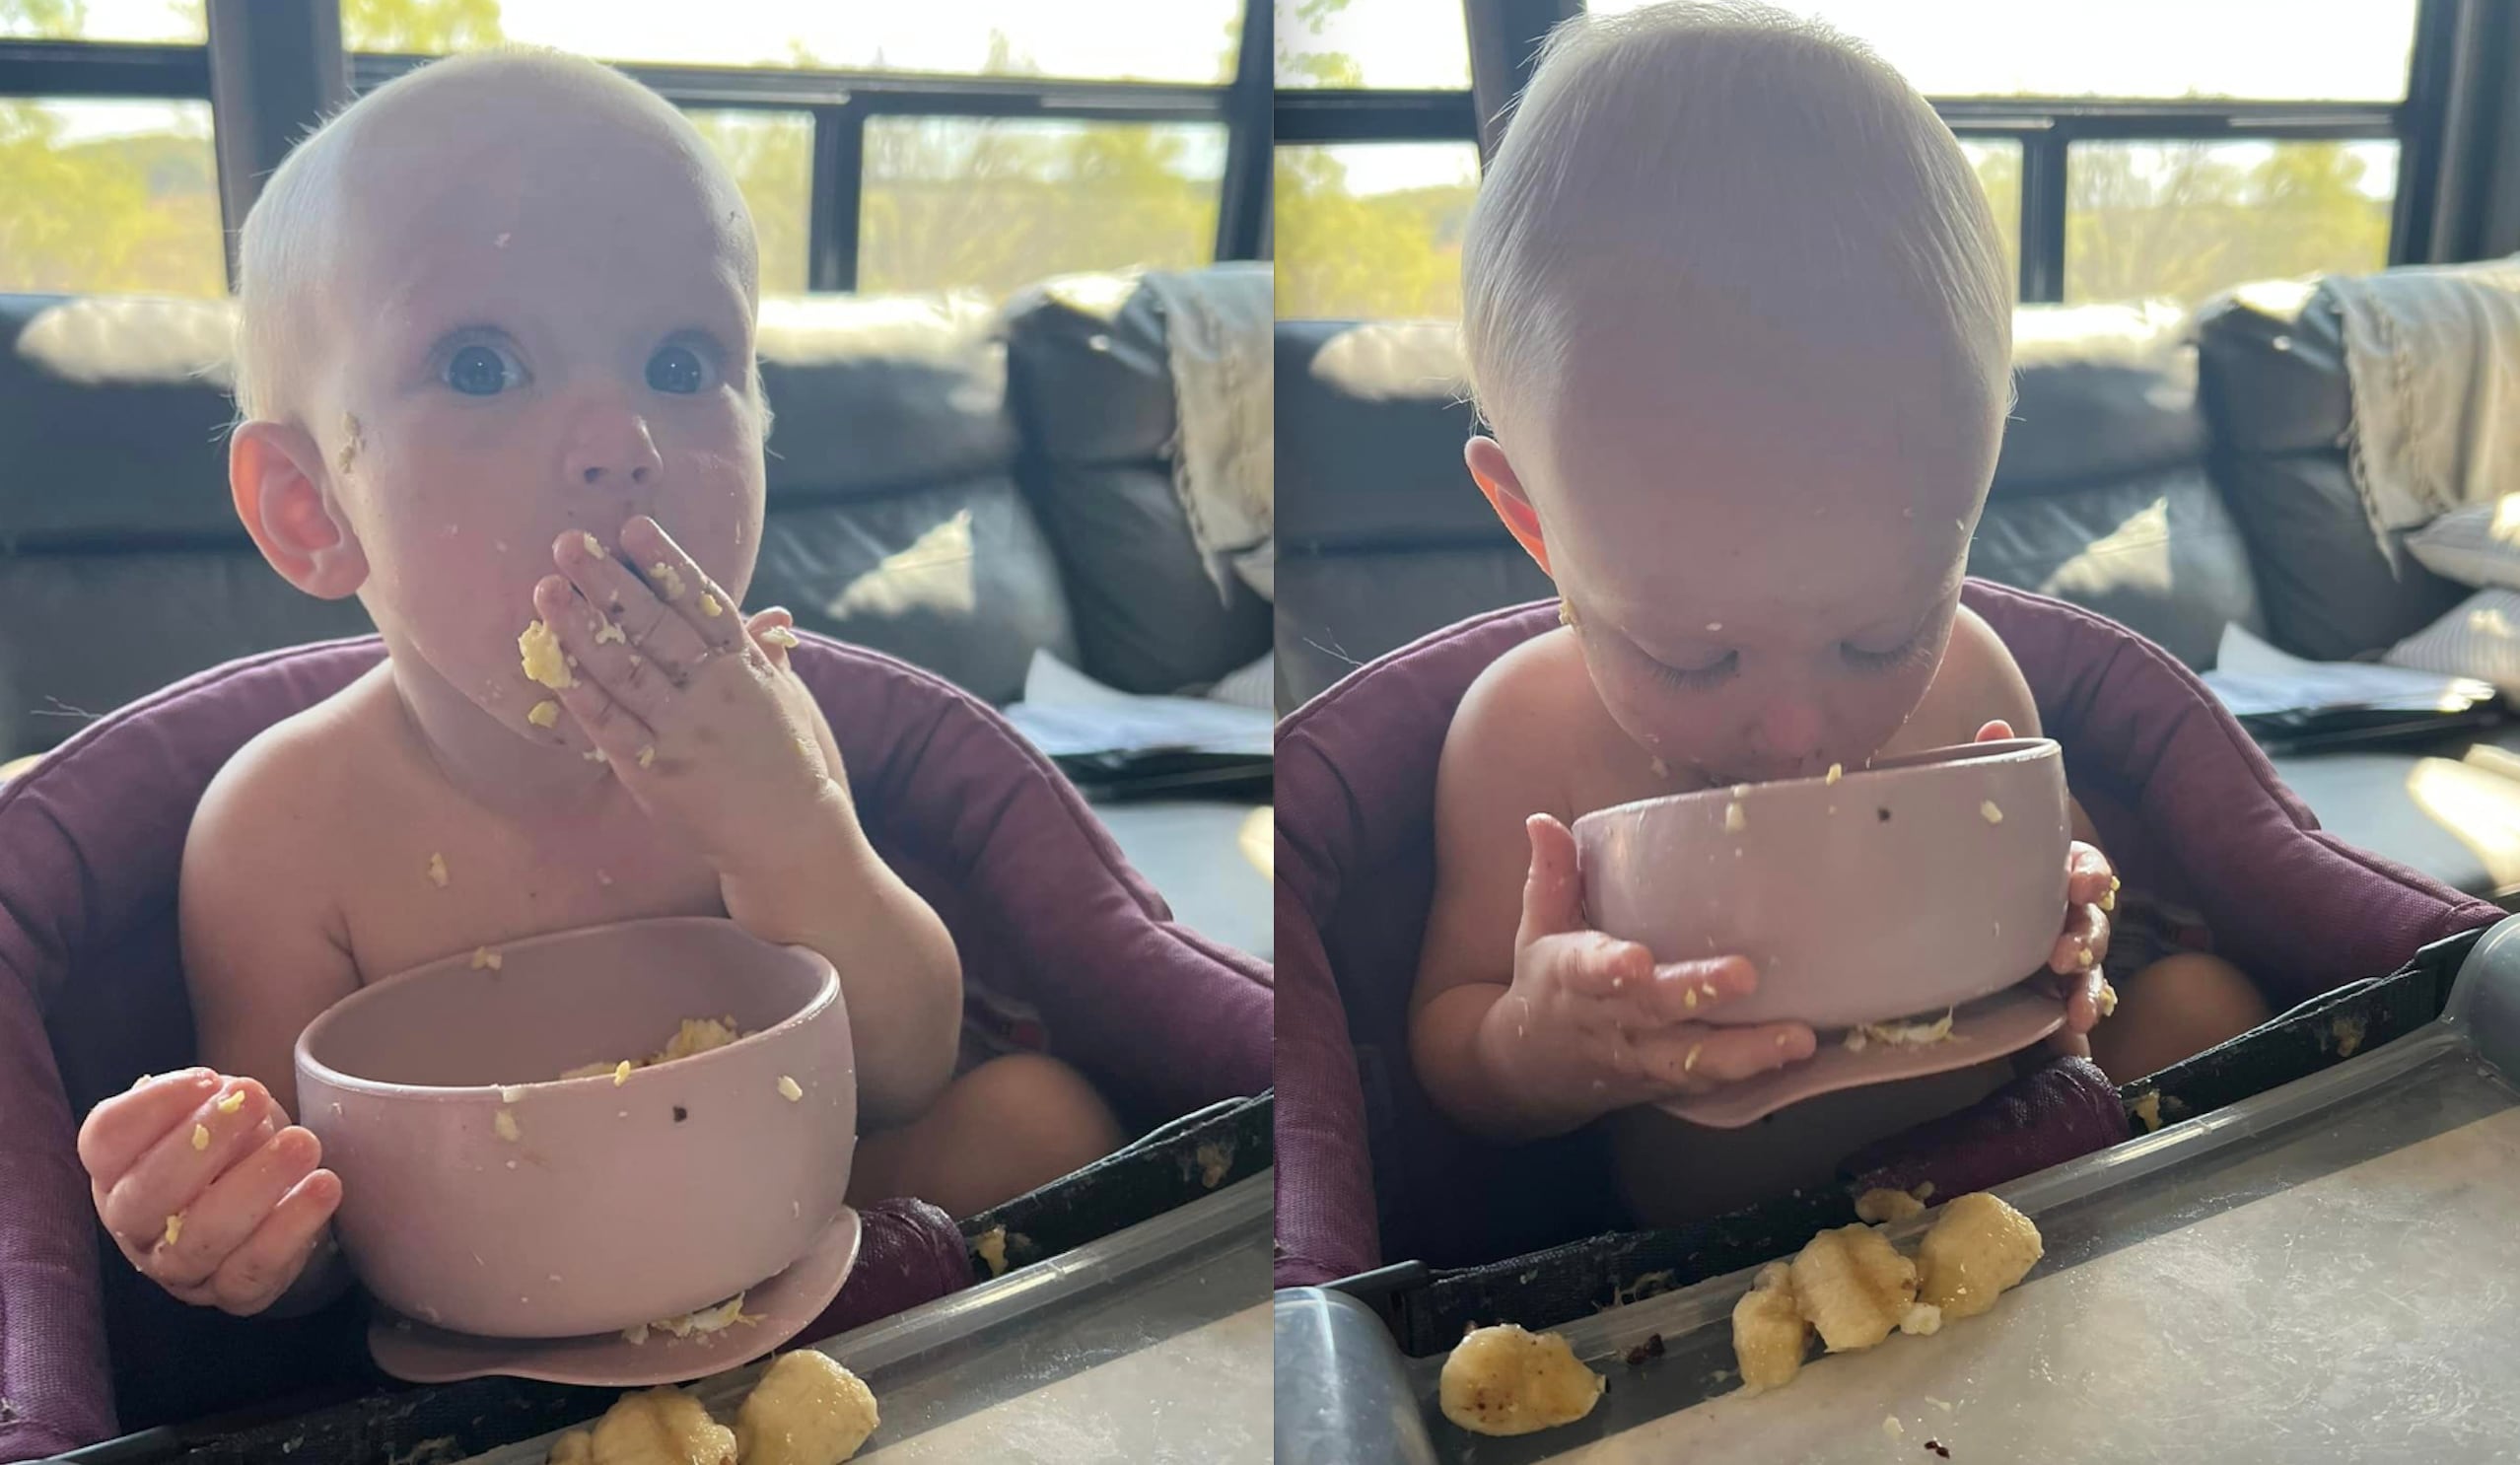 Silicone baby bowls – the hidden danger